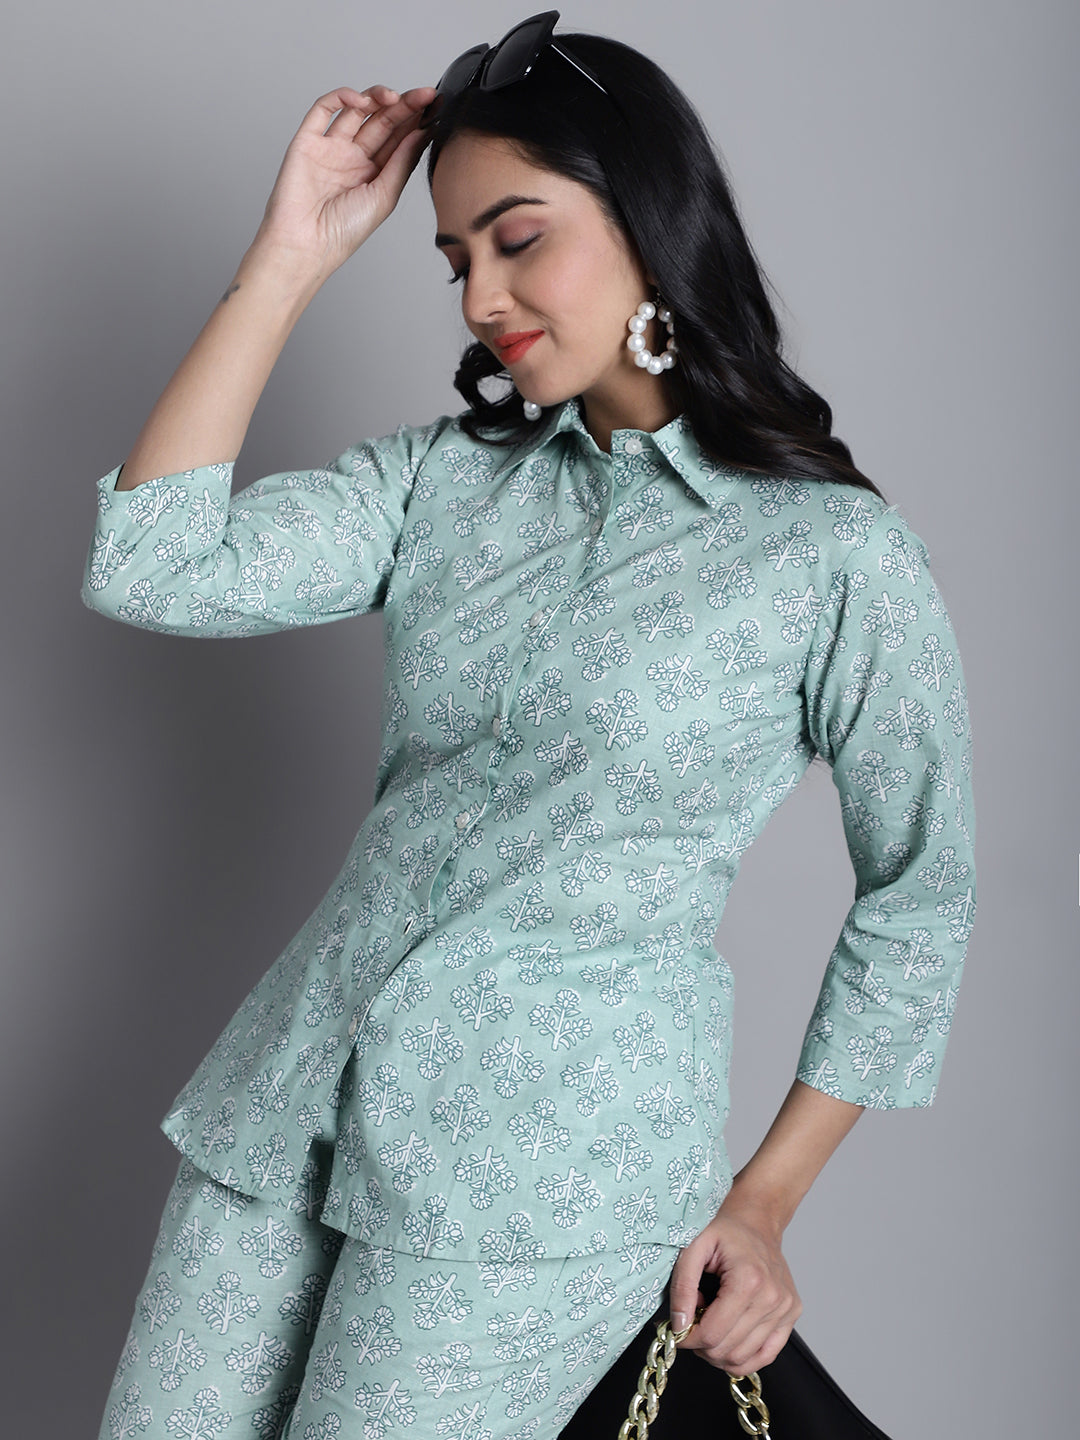 Women's Lime Green Printed Shirt and Trouser Co-ords Set ( JNCS 3008 Lime )